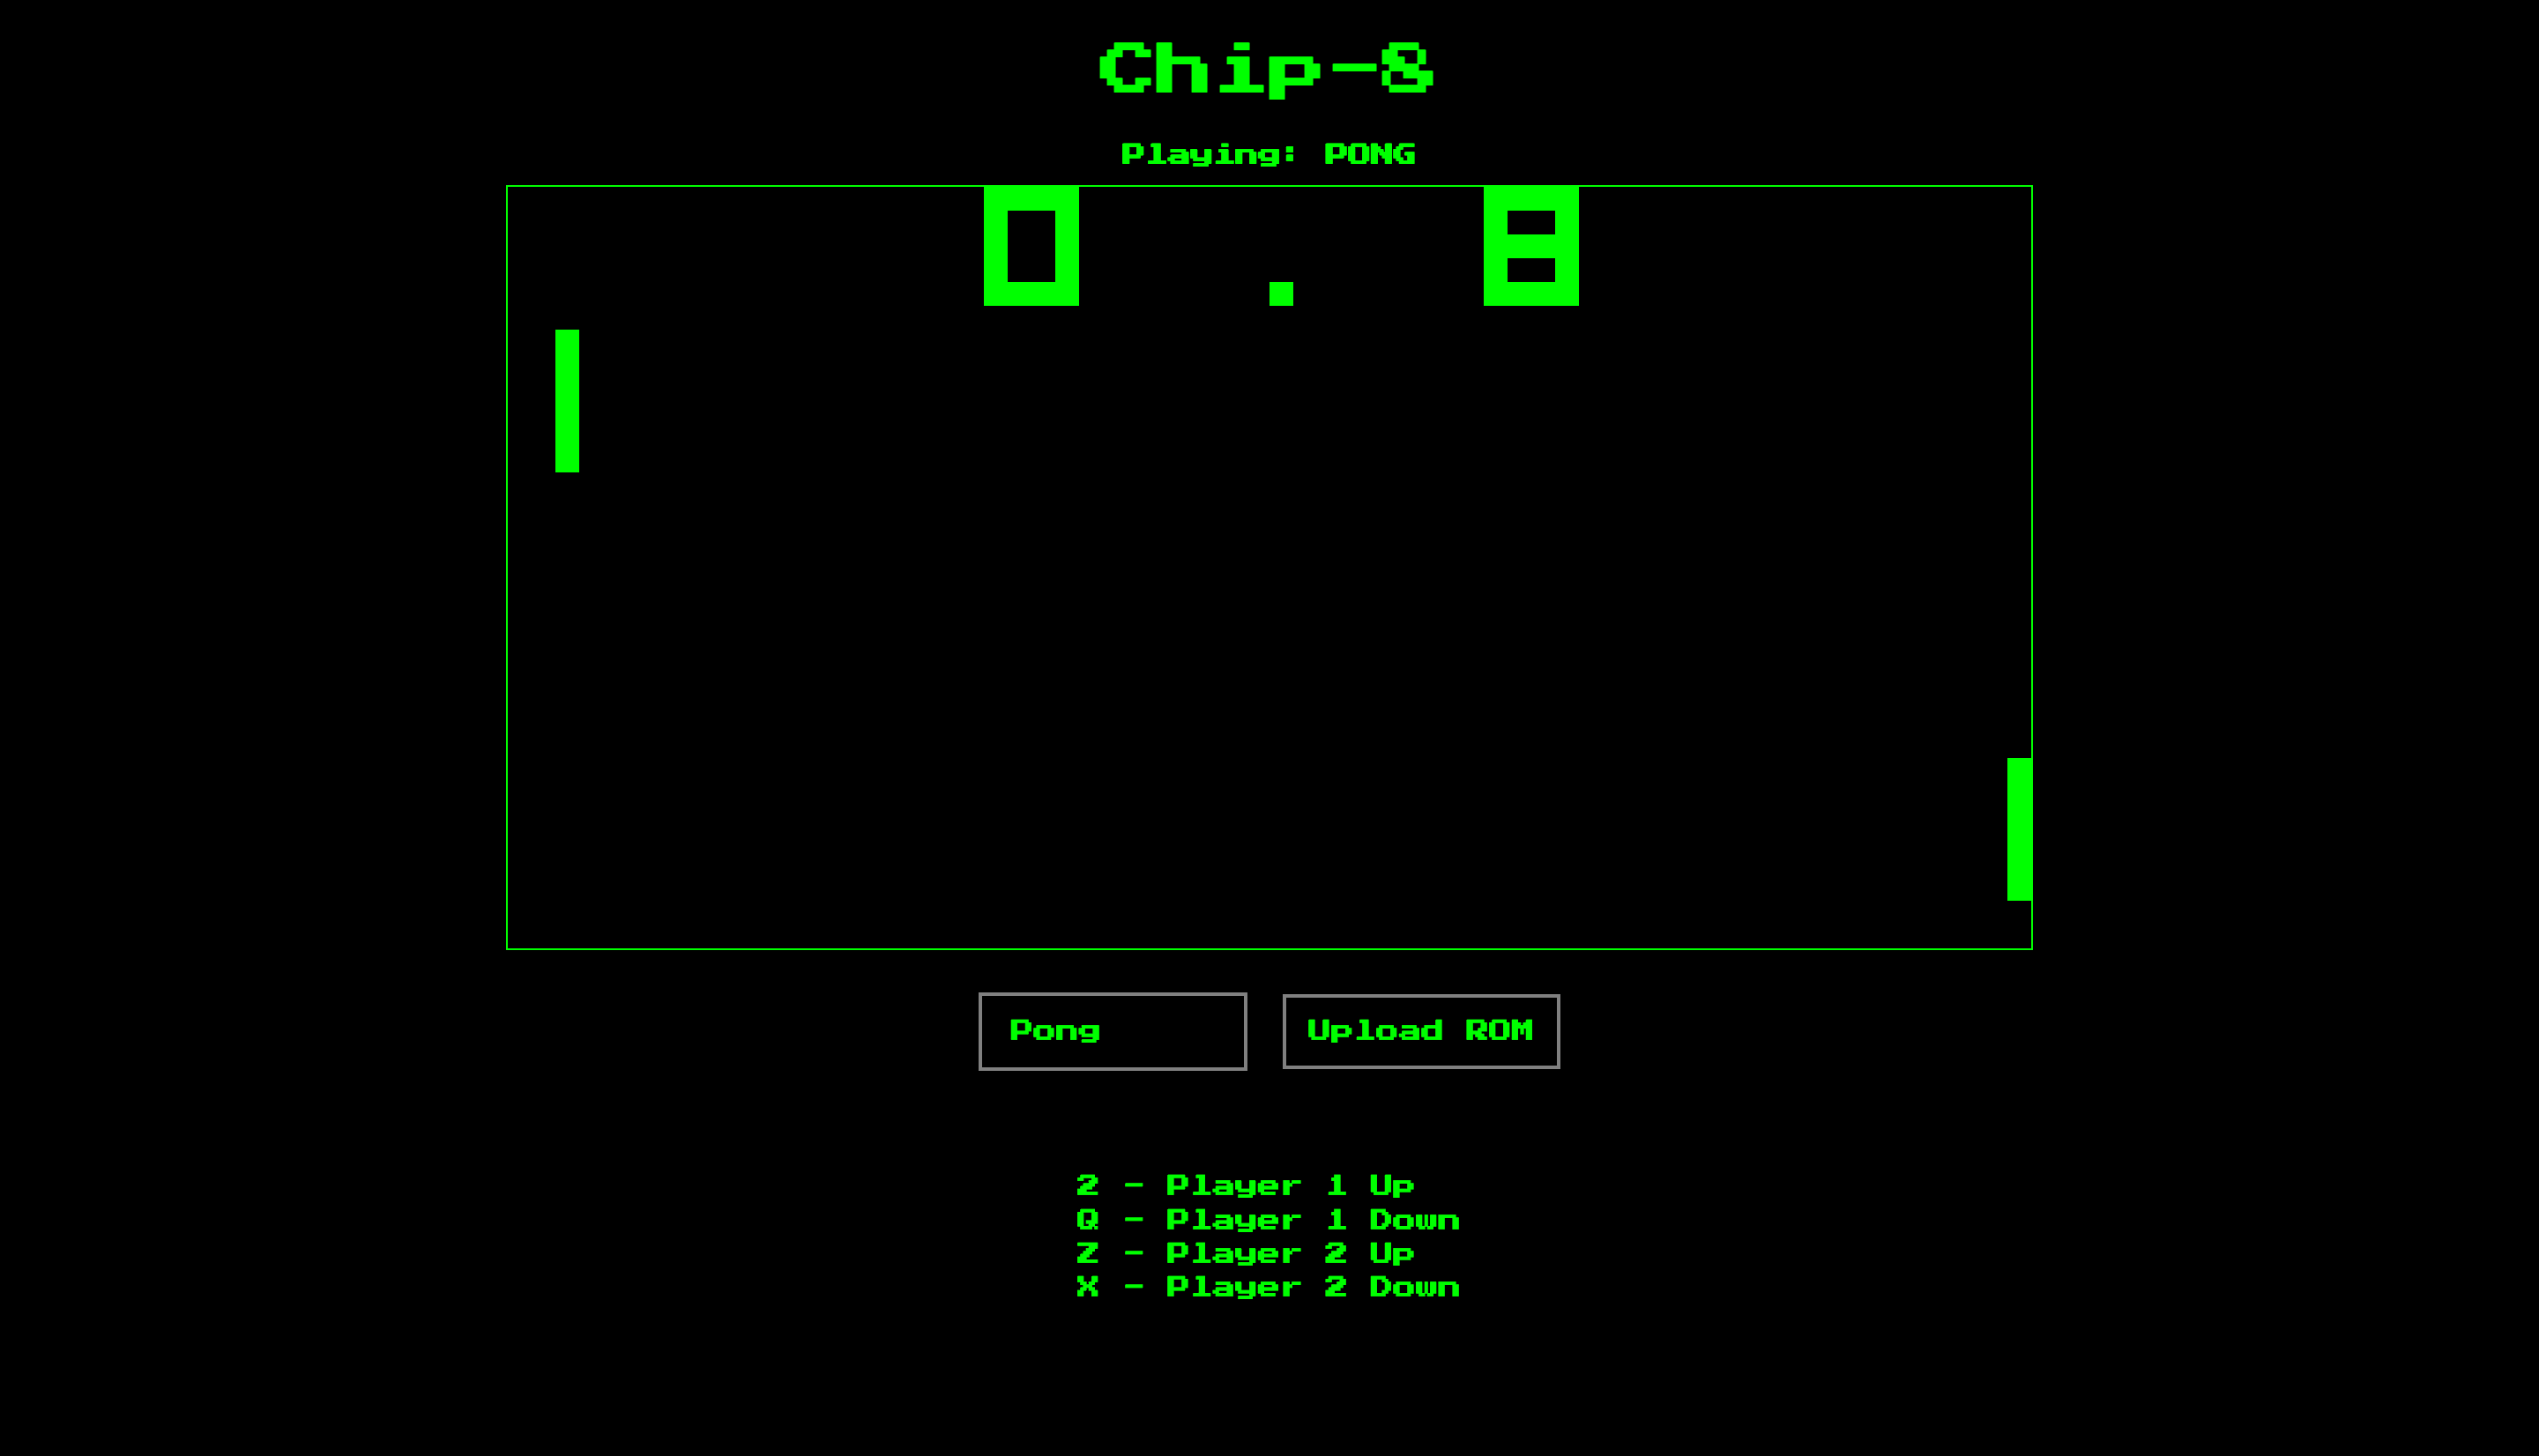 A snapshot of the project, which shows a chip-8 emulator running the Pong game